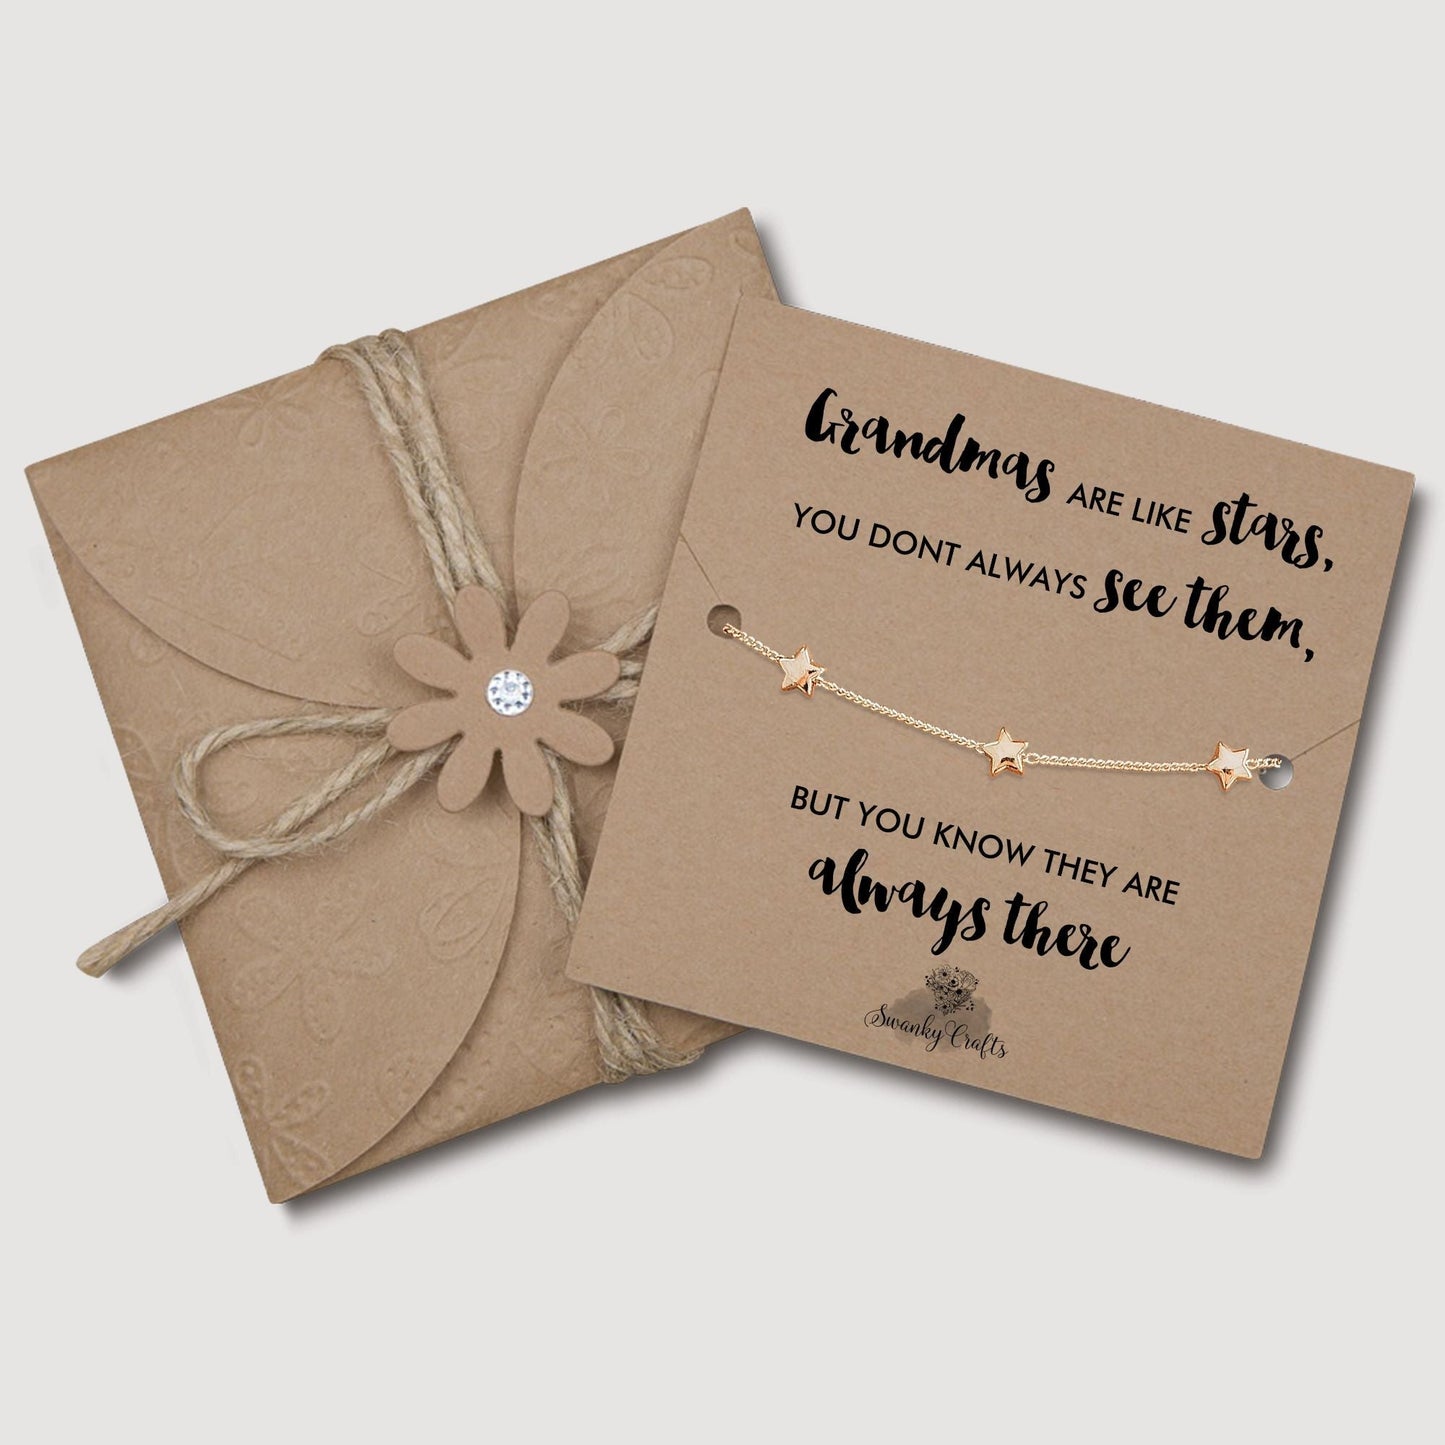 Granny Bracelet - 18ct Gold Star Bracelet with Card and Gift Wrap